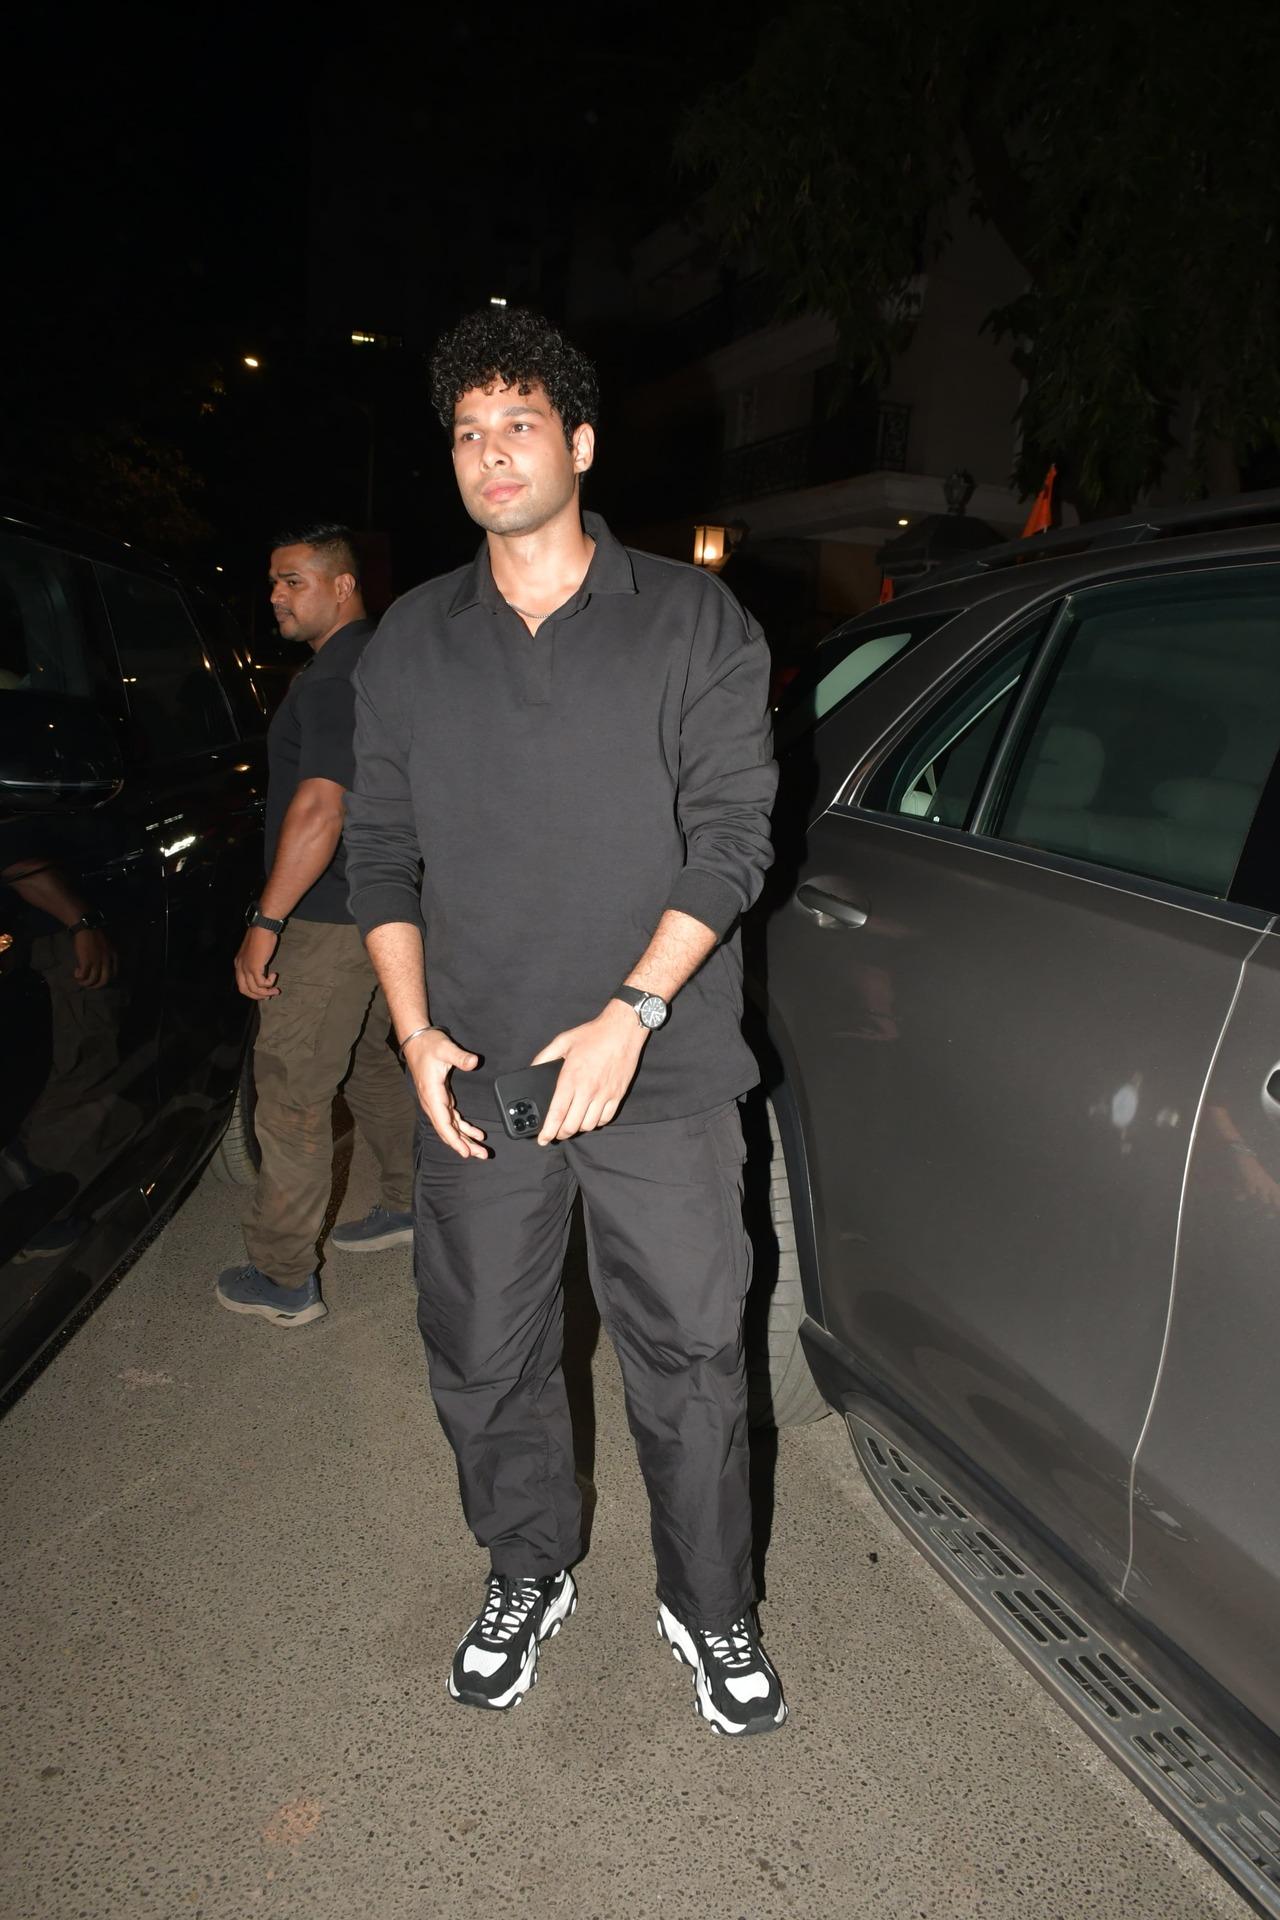 Siddhant Chaturvedi was spotted in  a clean-shaven look as he arrived at the venue in an all-black outfit